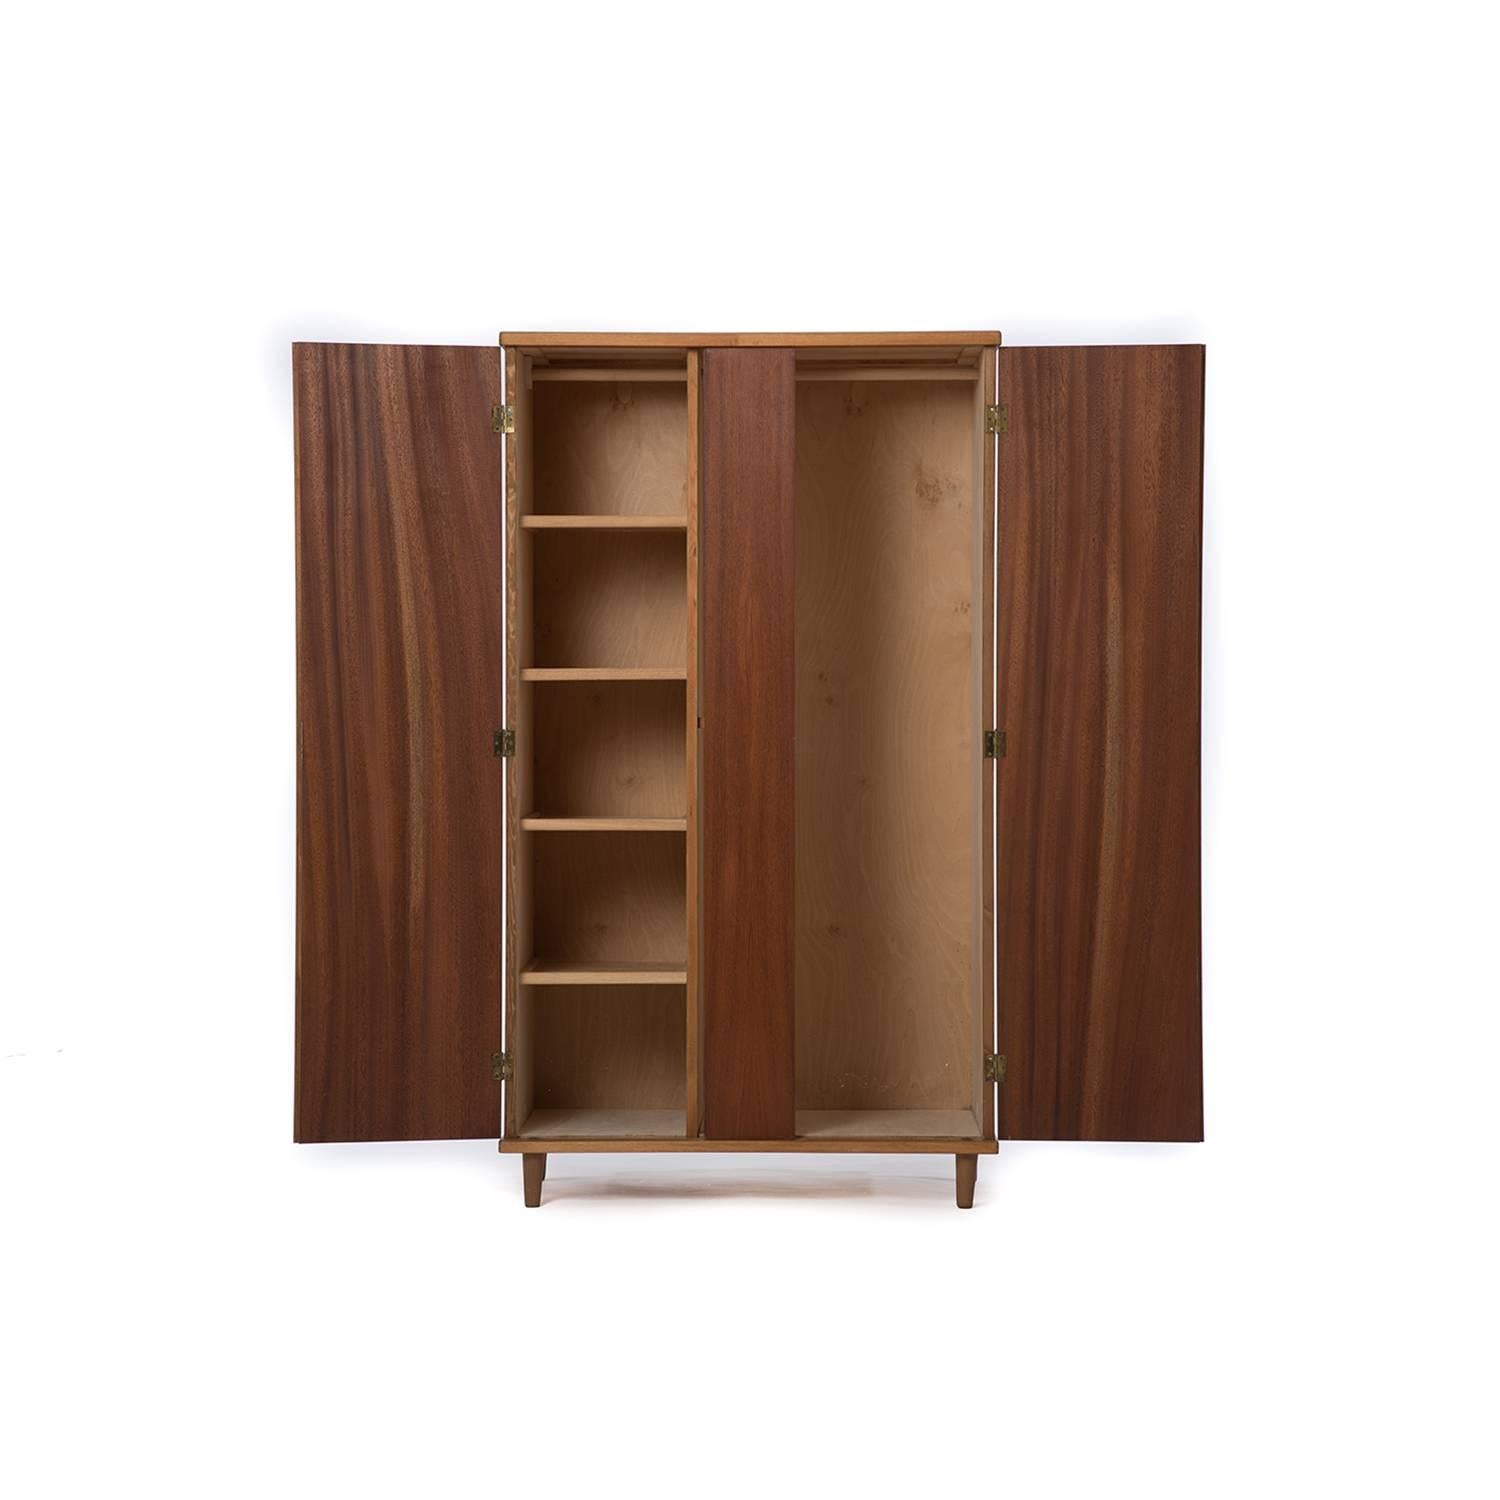 This Classic piece has an old growth teak exterior and a beechwood finished interior with hanging bars in both compartments as well as adjustable/removable shelves in the left compartment. Key locking doors (key included with purchase though not